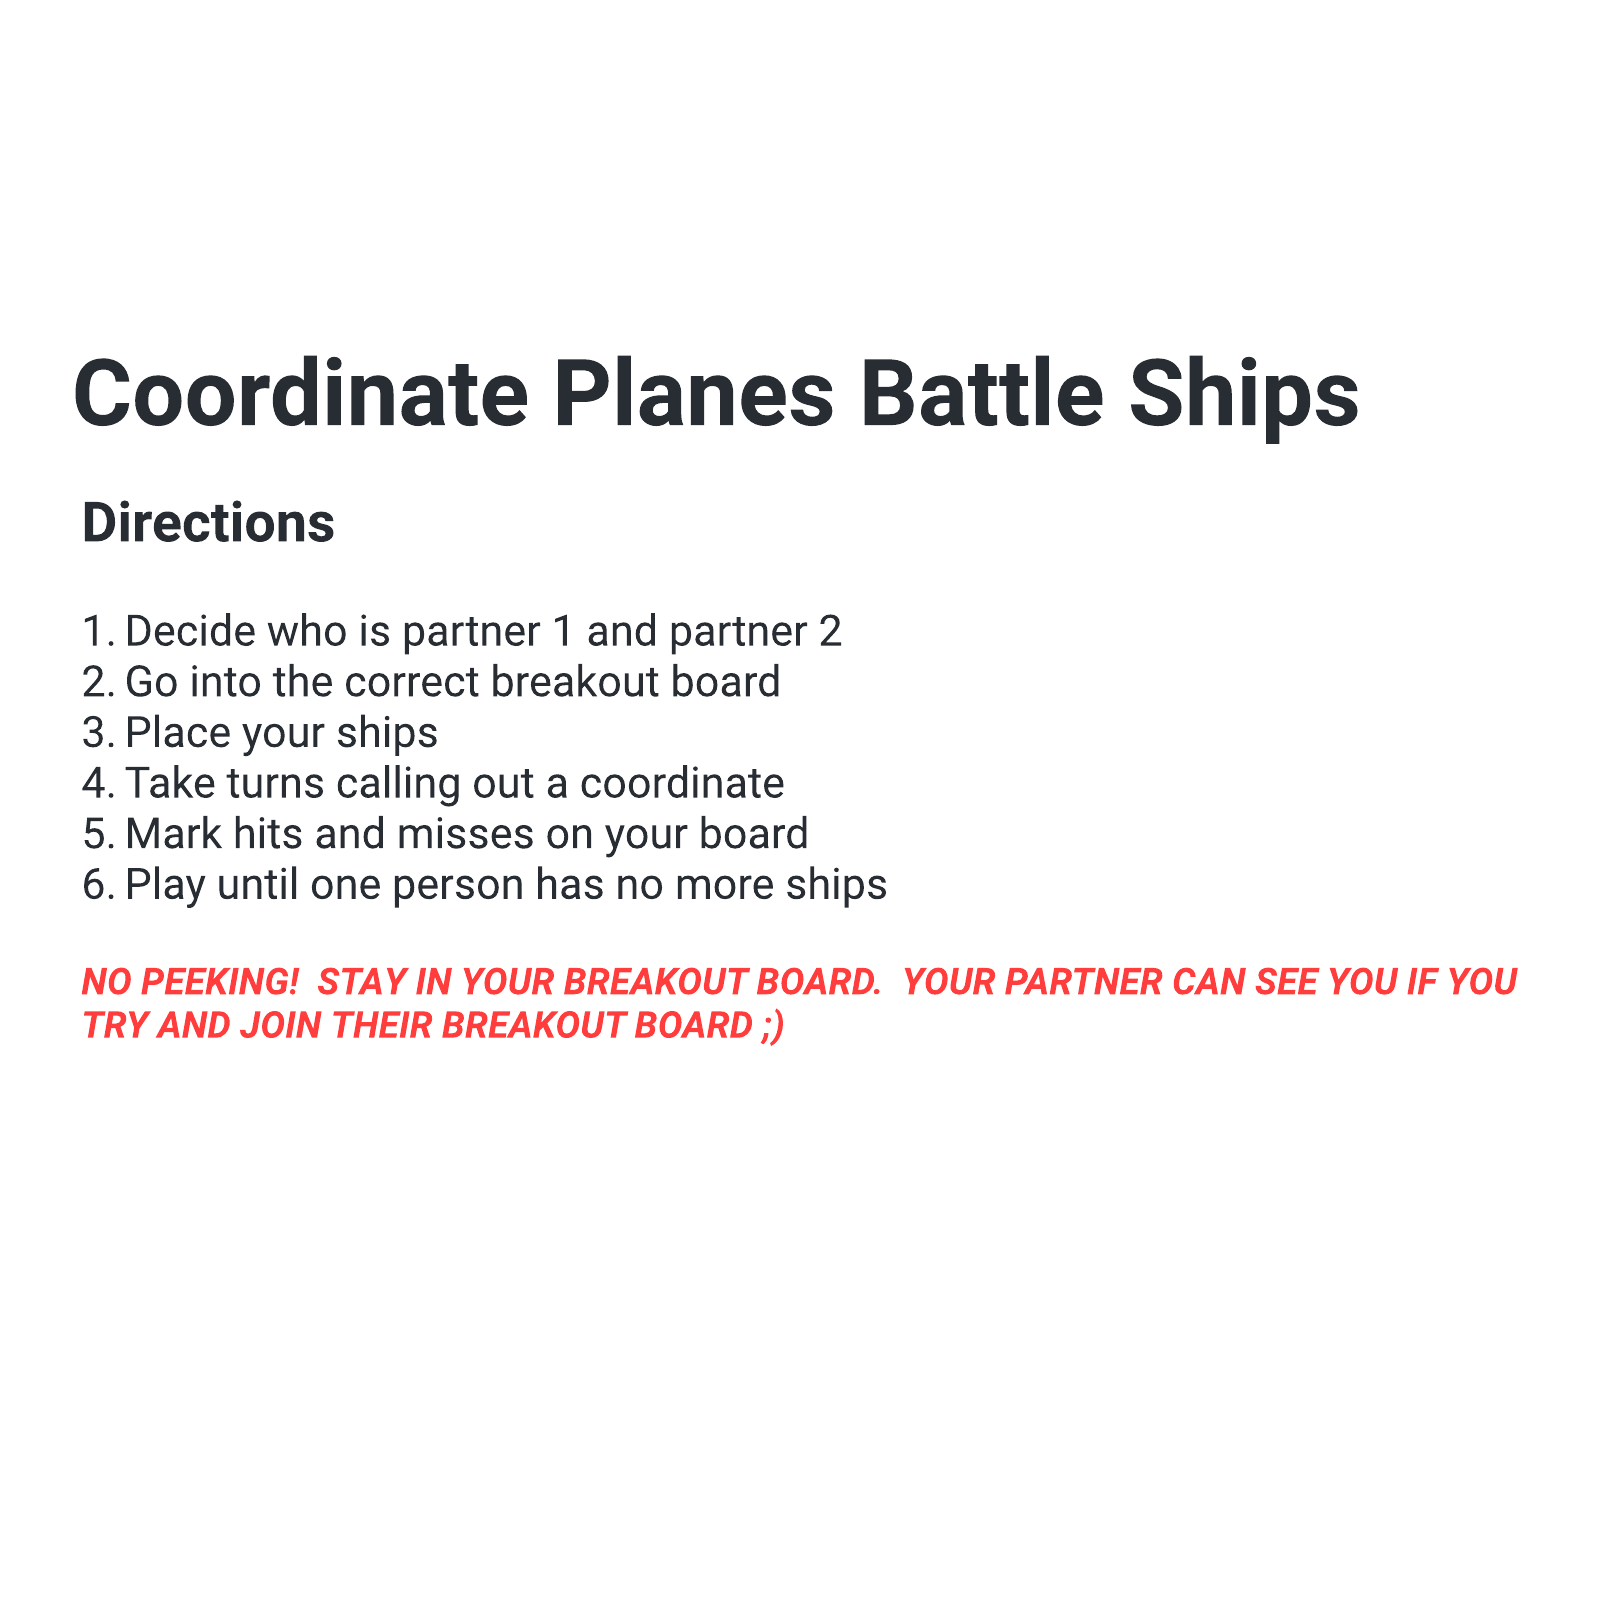 Coordinate planes battle ships  example